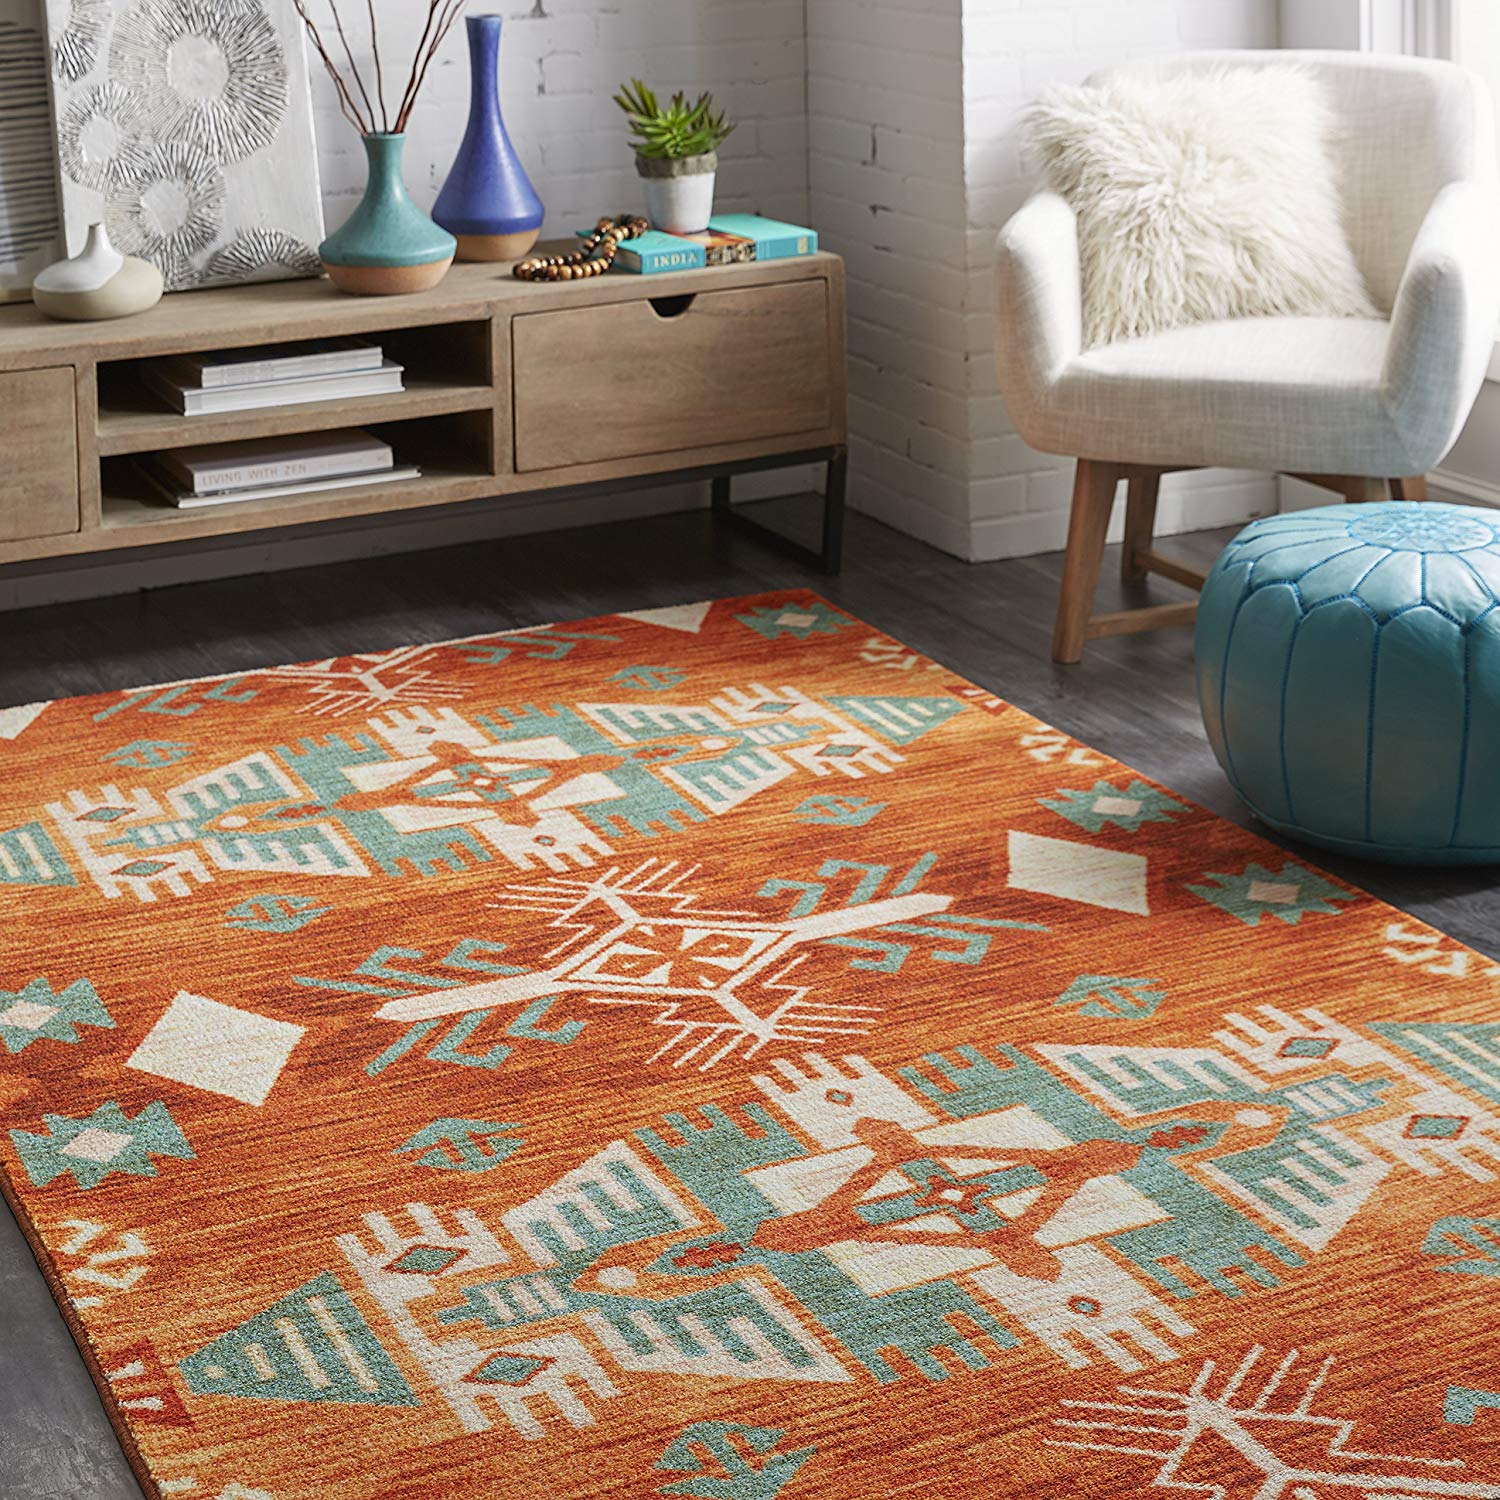 Orange From Bright To Warm And Cozy, Mohawk Home Rugs Target